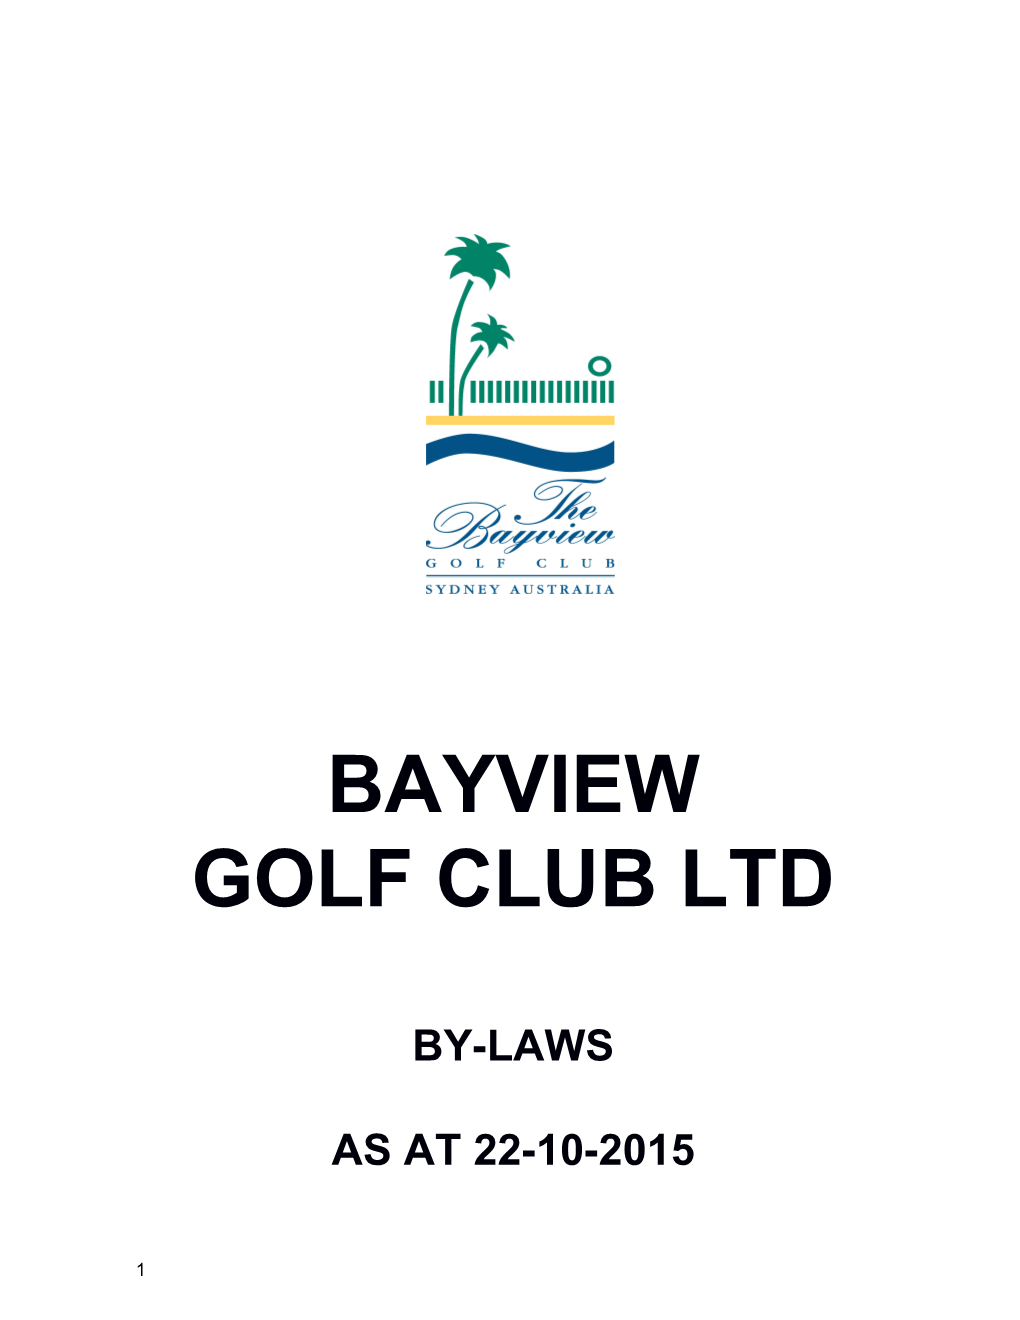 By-Laws of Bayview Golf Club